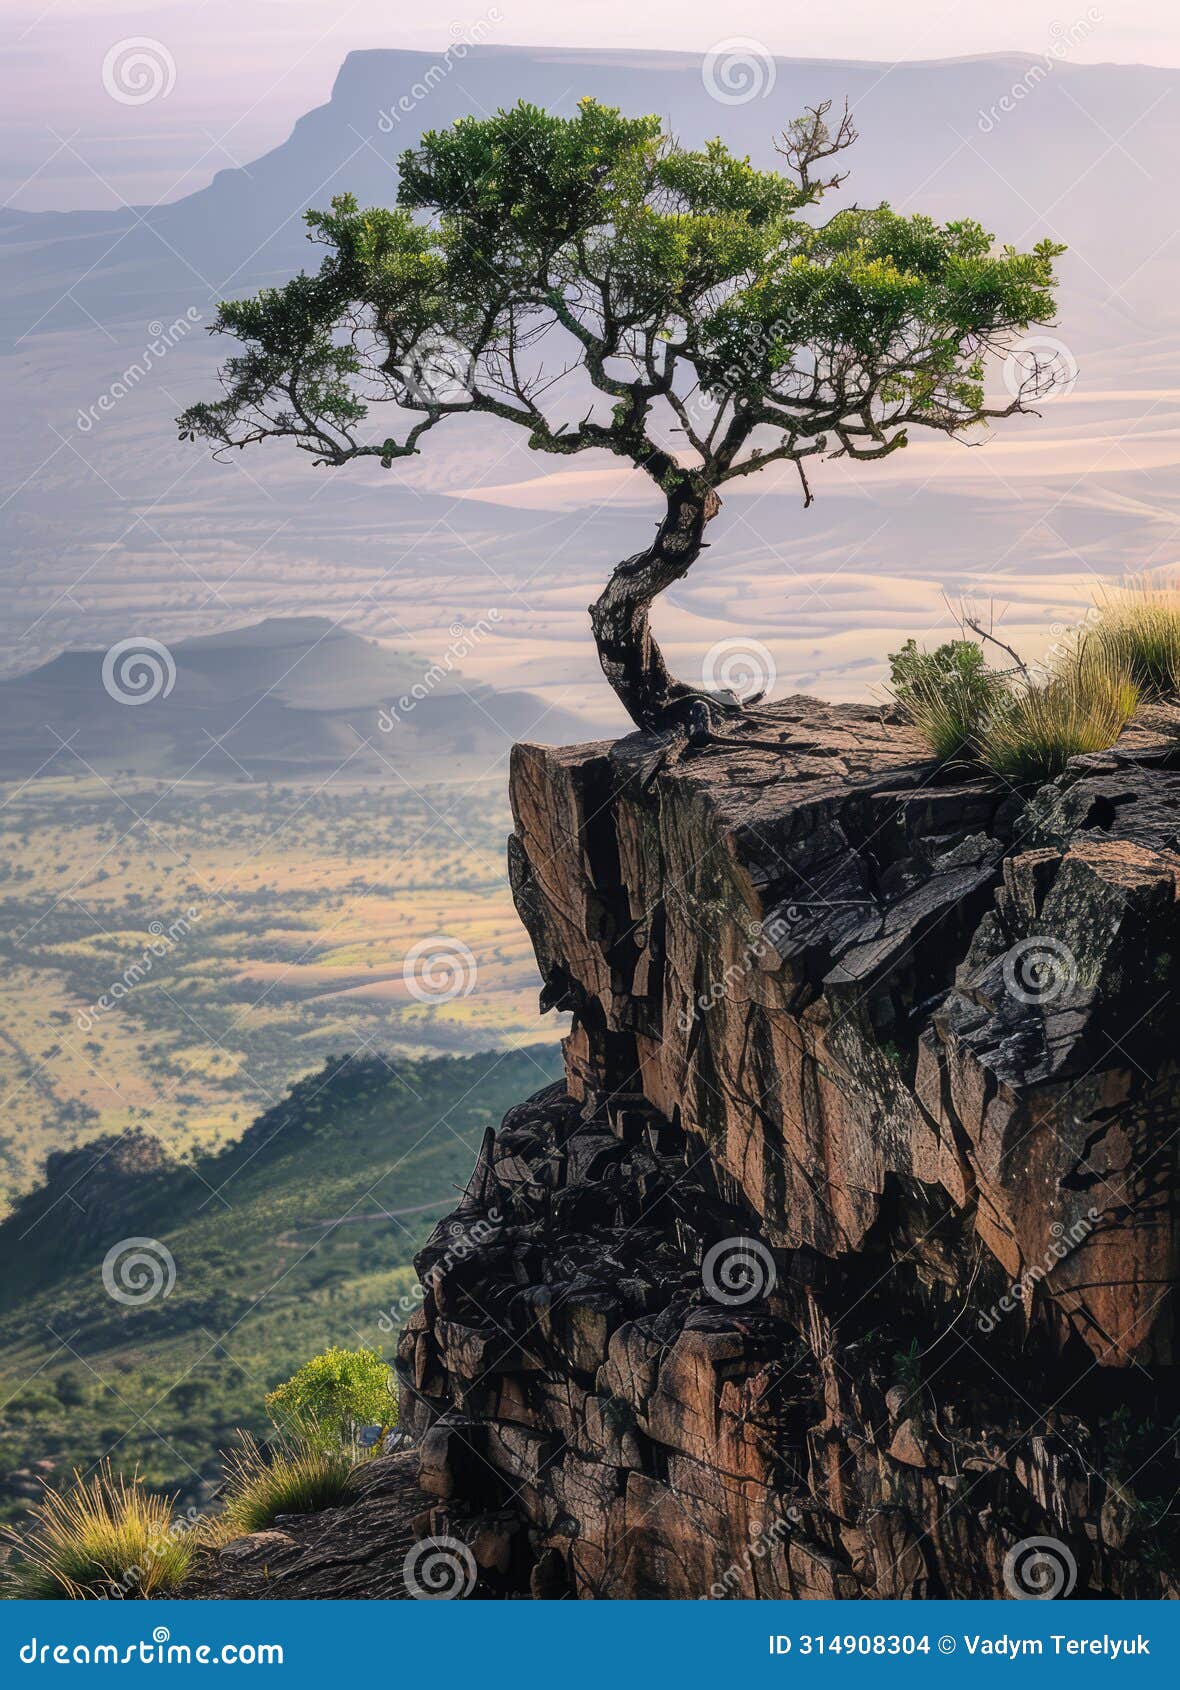 A Lone Tree Stands on a Rocky Cliff Overlooking a Vast, Empty Plain ...